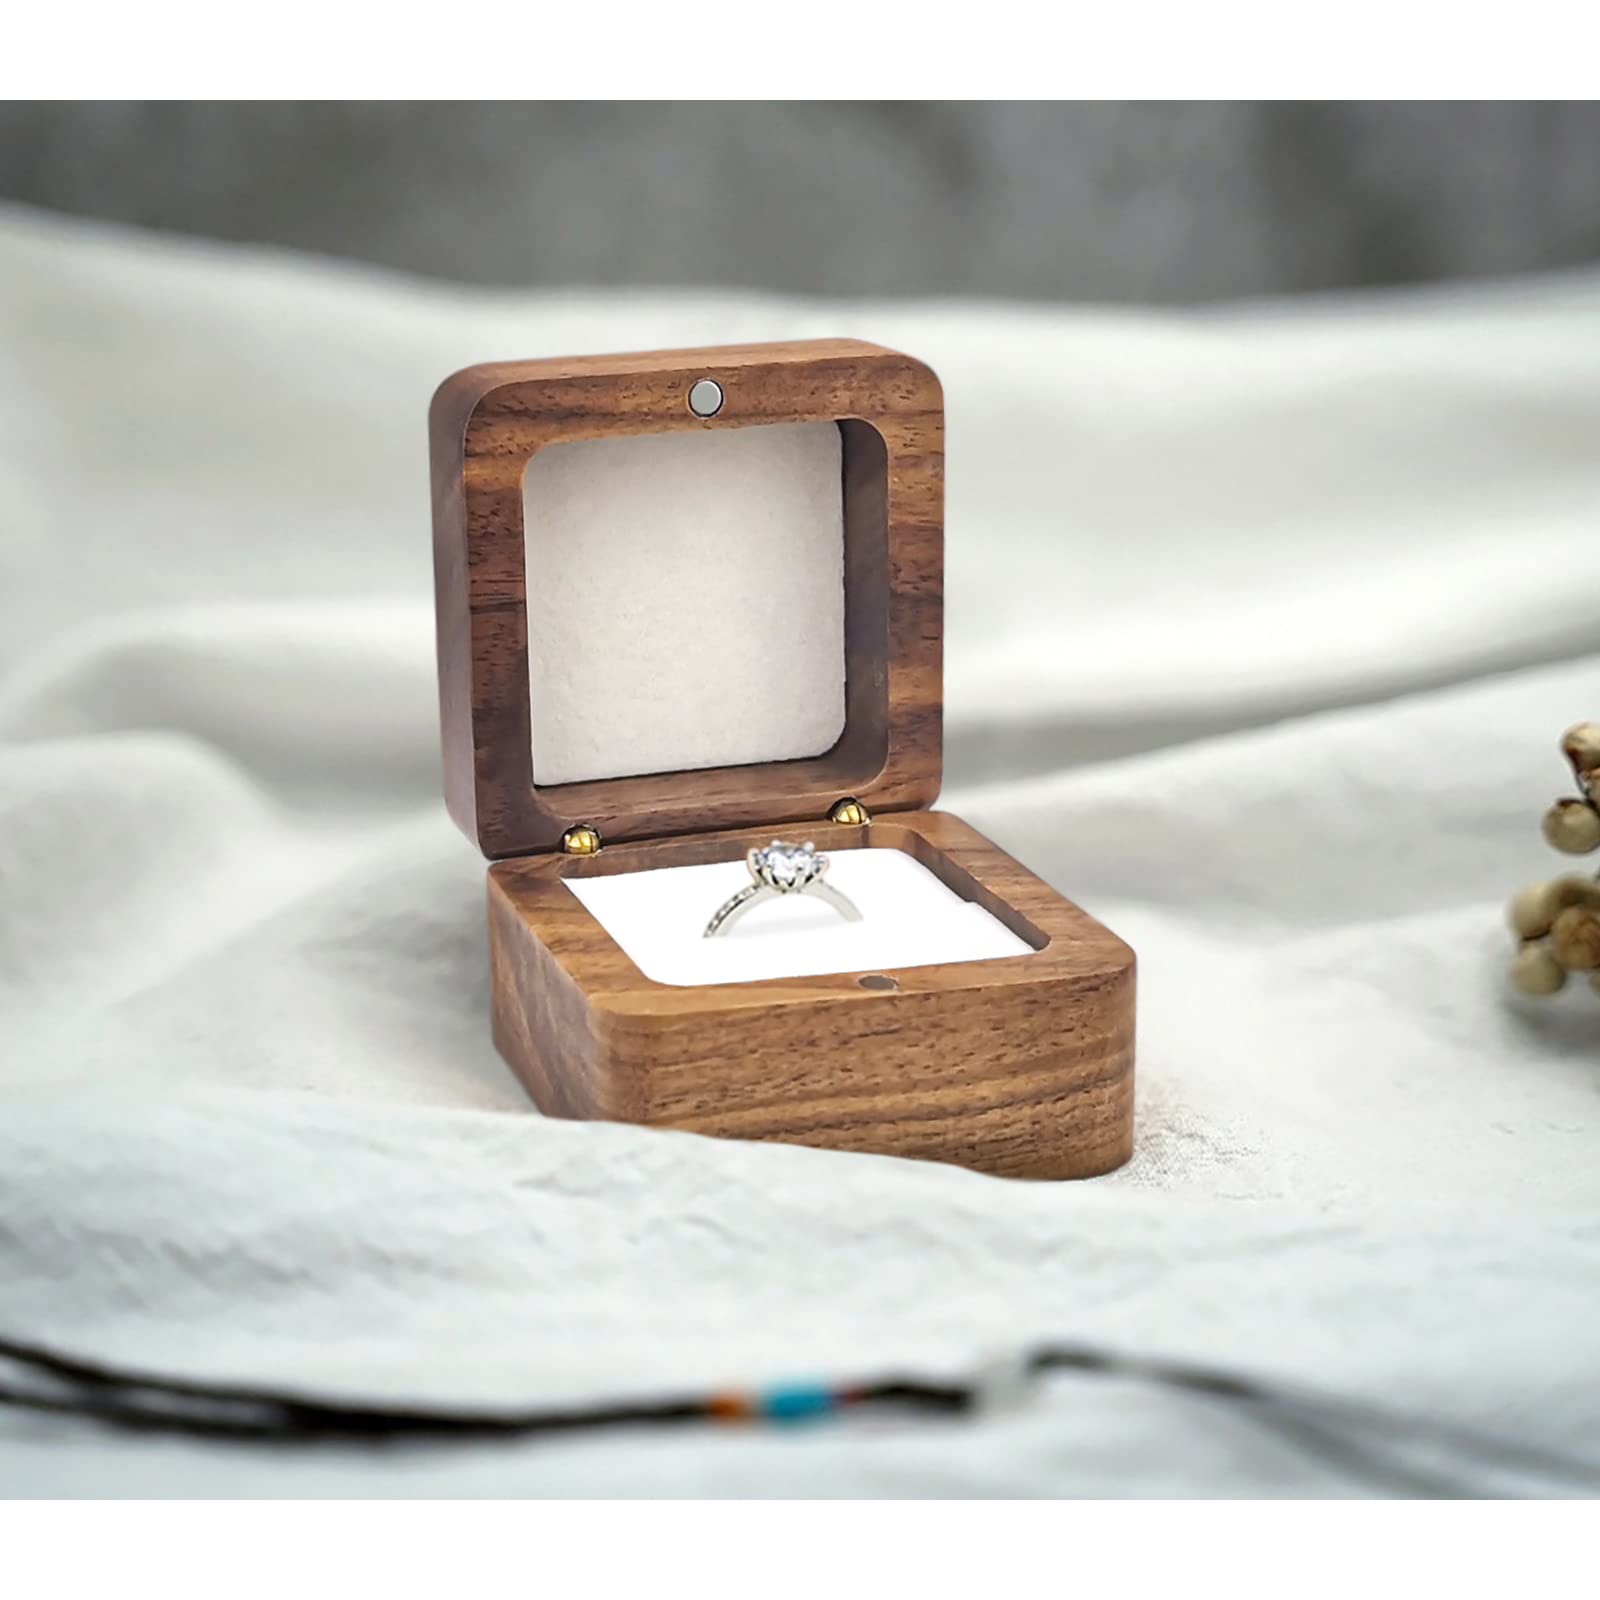 Square Solid Wood Double Ring Box Case Wedding Ceremony Engagement Proposal Wooden Ring Holder